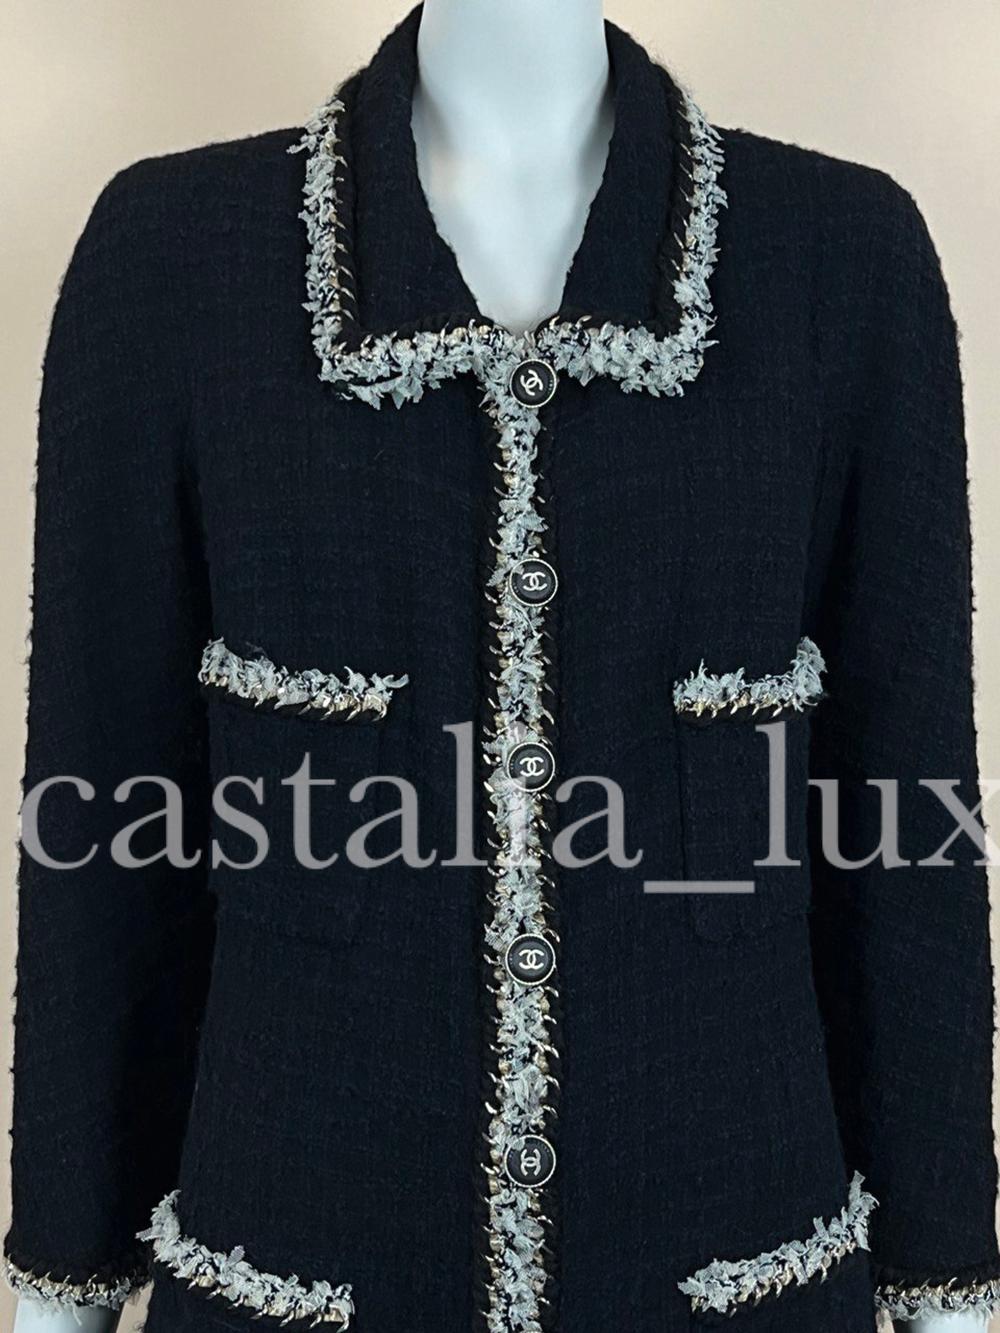 New stunning, collectible Chanel black tweed jacket with signature metallic chain link trim!
Boutique price over 9,000$
Size mark 40 fr. never worn.
- CC logo wood & metal buttons
- full silk lining with camellias